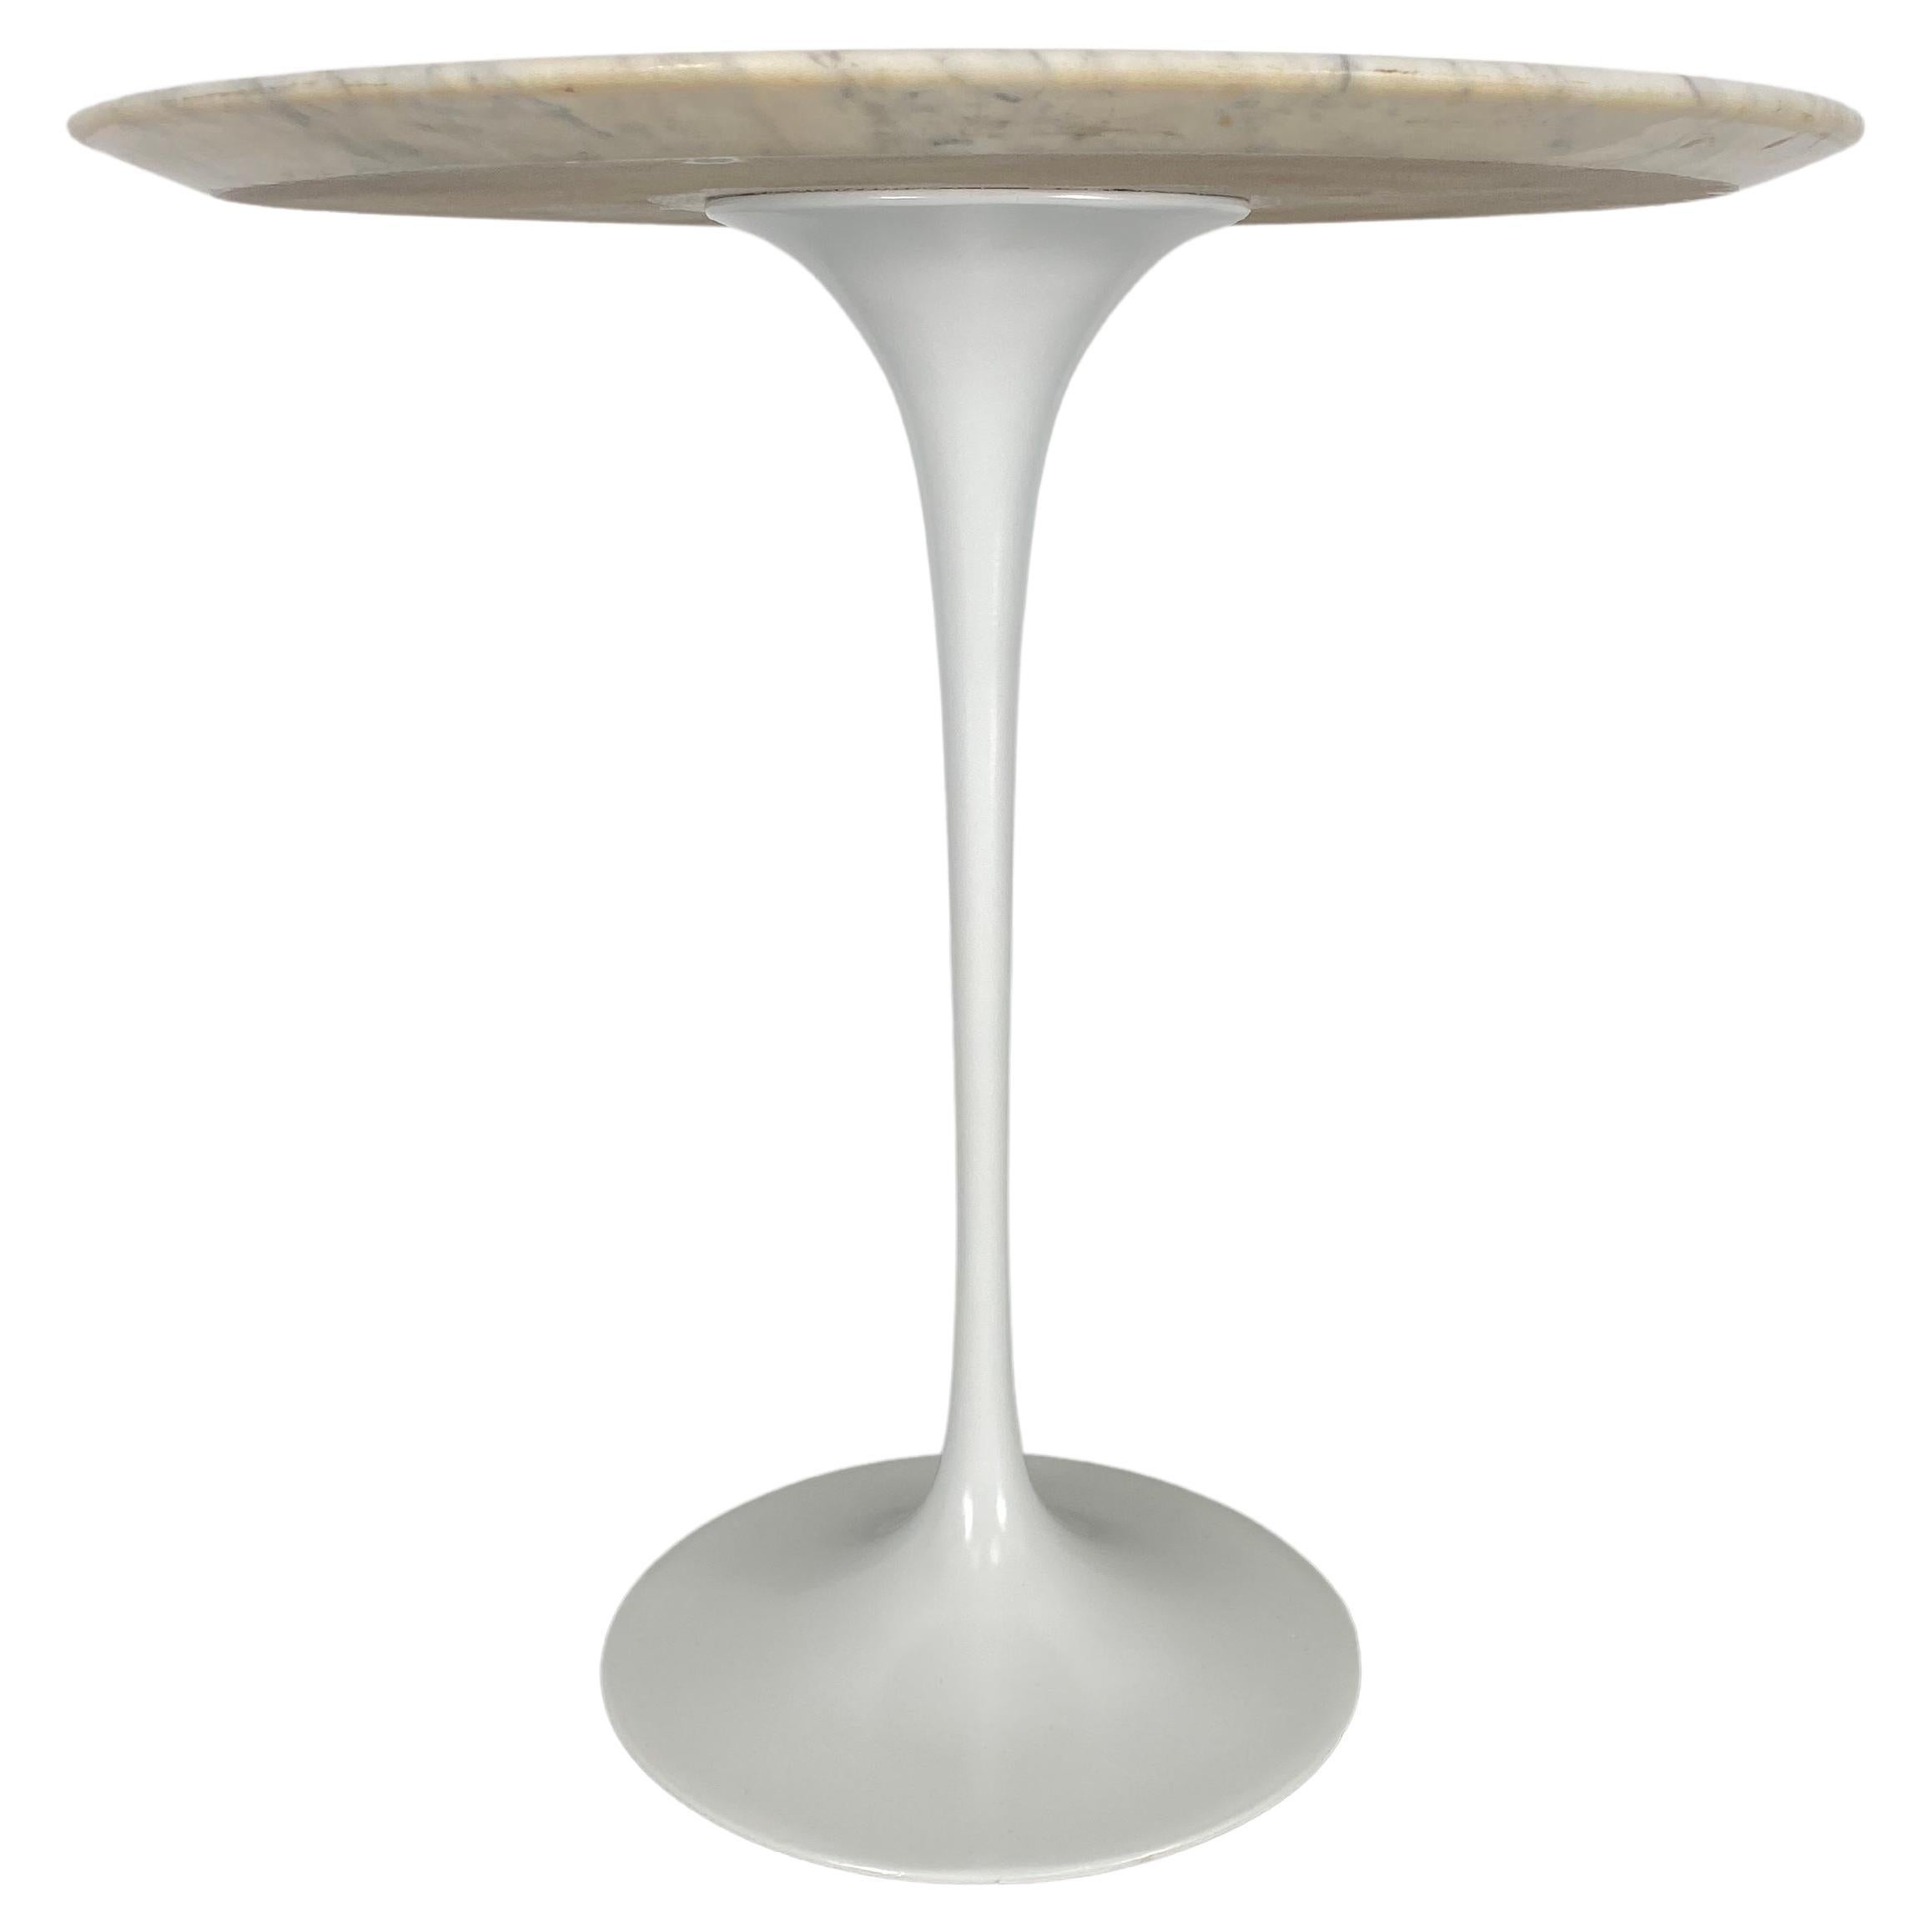 Classic Modernist Marble Top Tulip Table by Eero Saarinen for Knoll